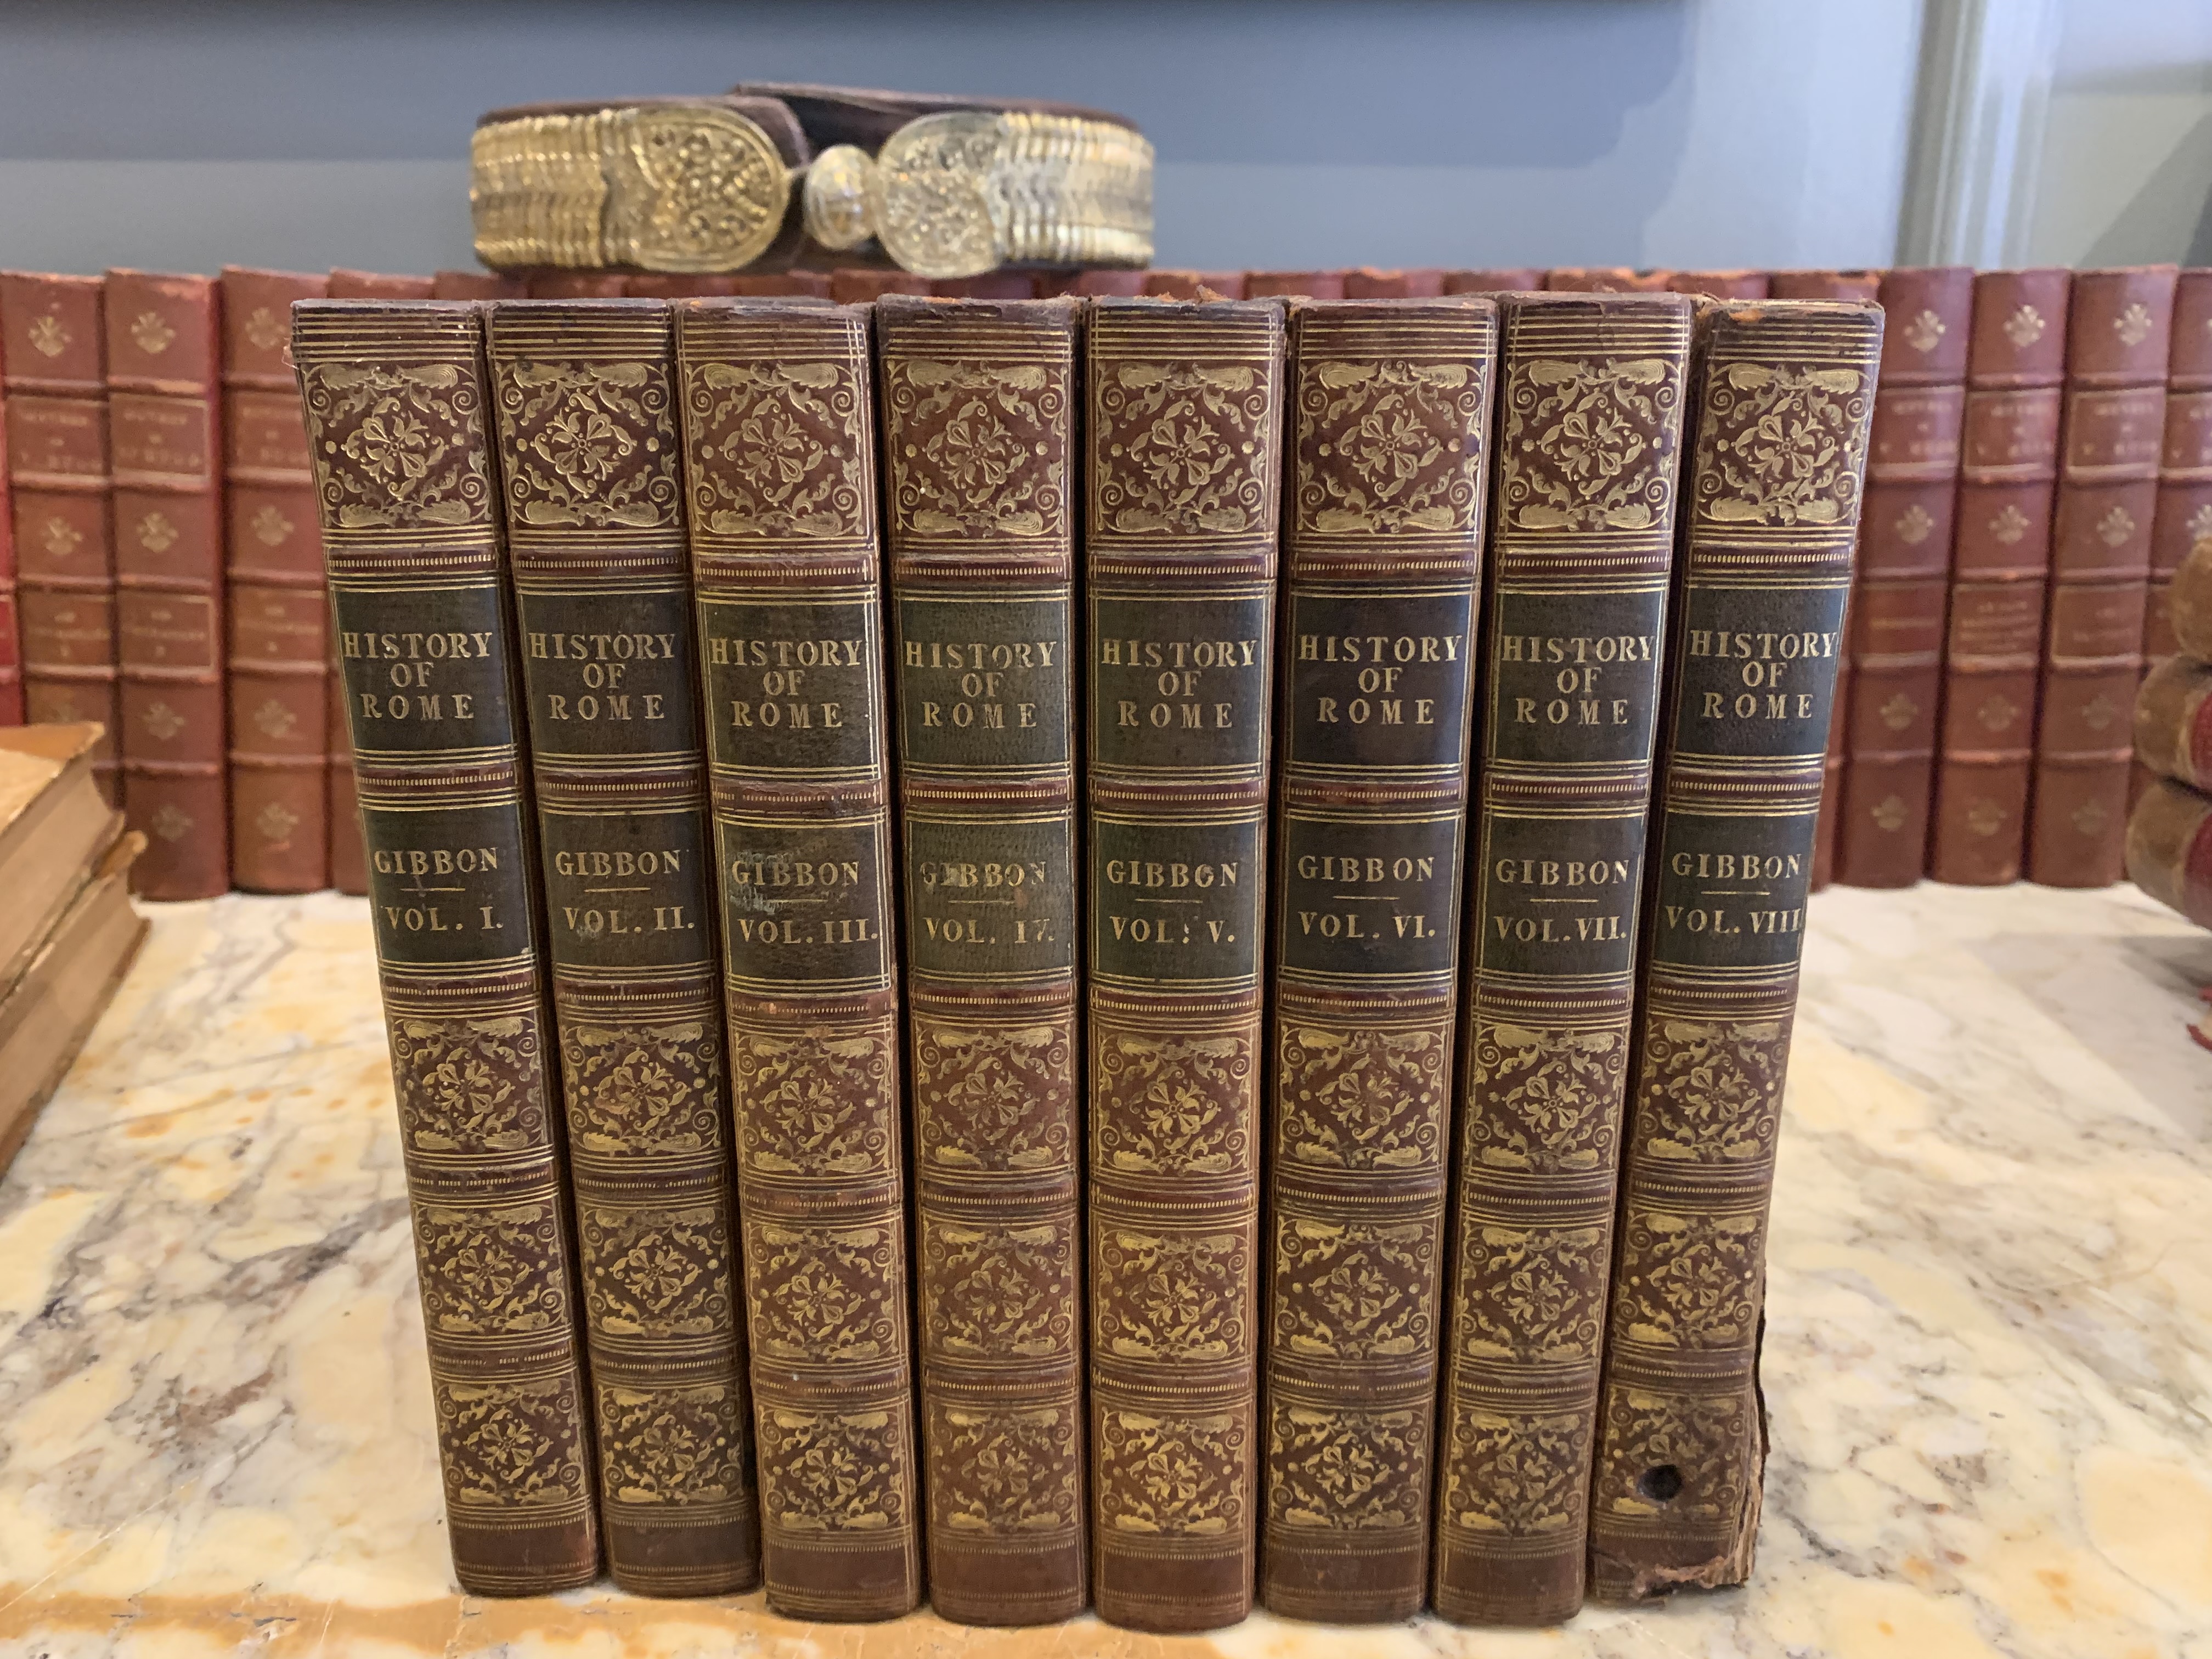 No reserve, 8 volumes, Edward Gibbon, The History of the Decline and Fall of the Roman Empire, 1821